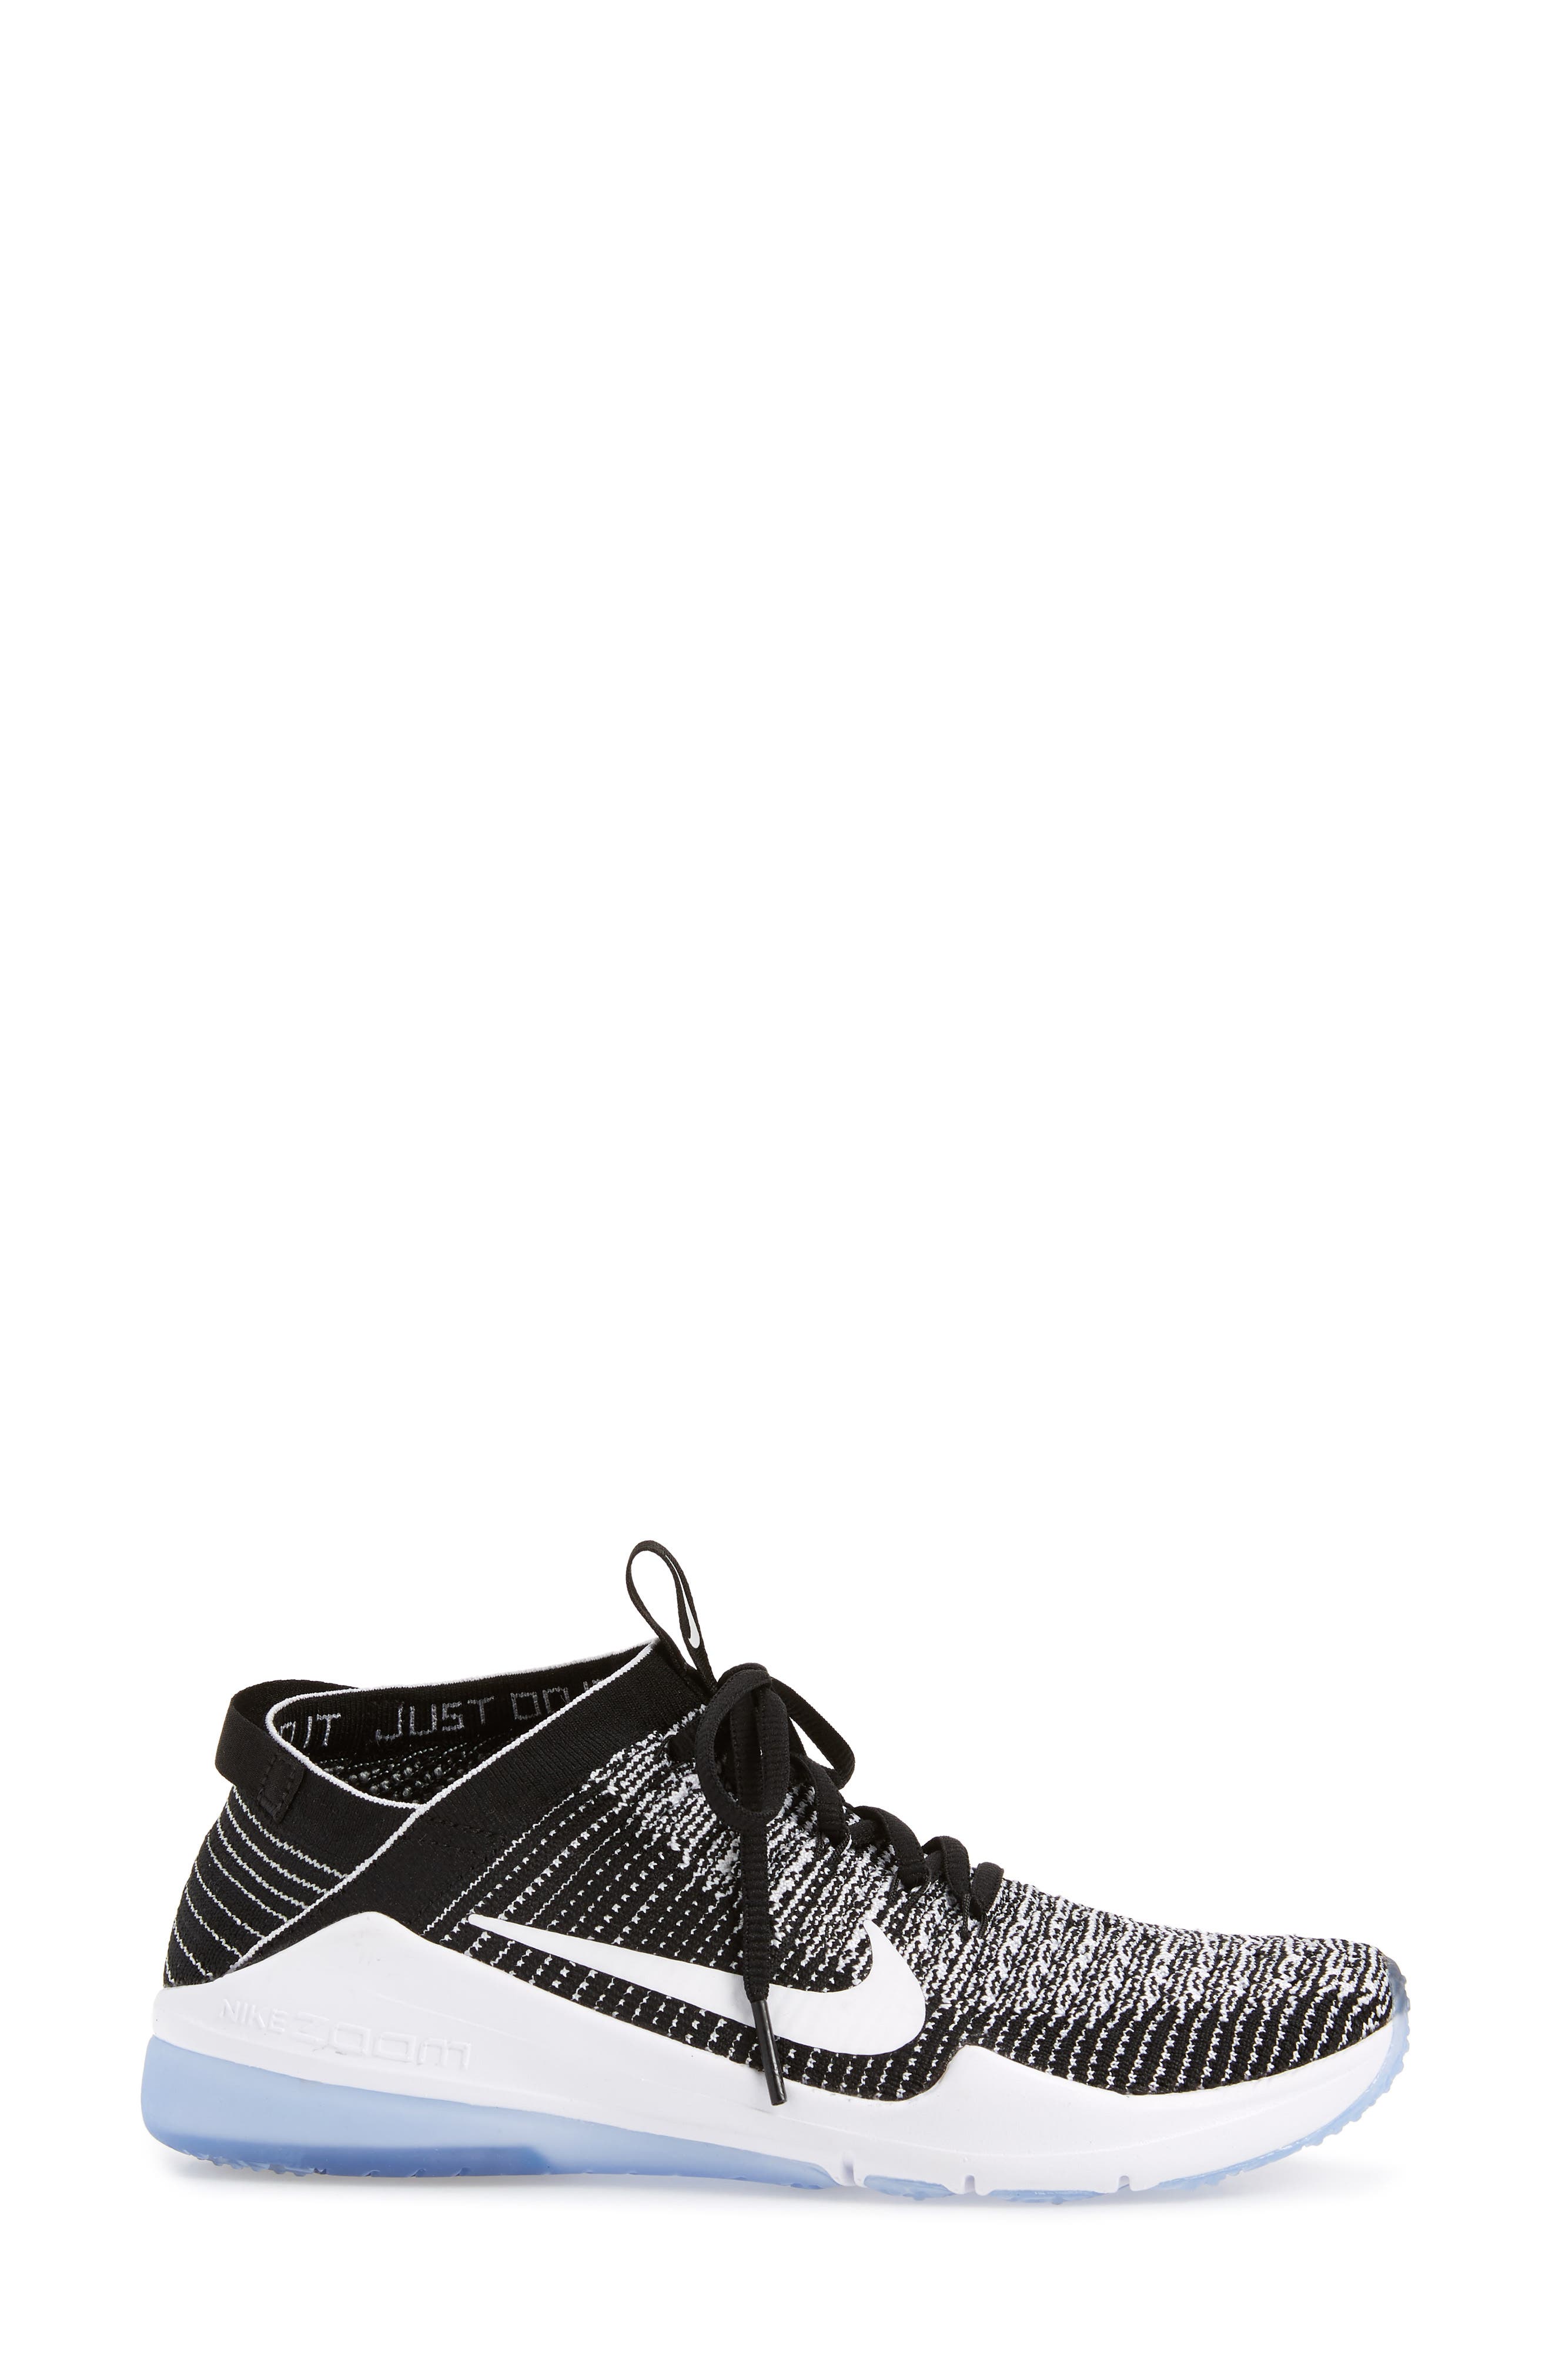 nike zoom air fearless flyknit 2 amp training shoe